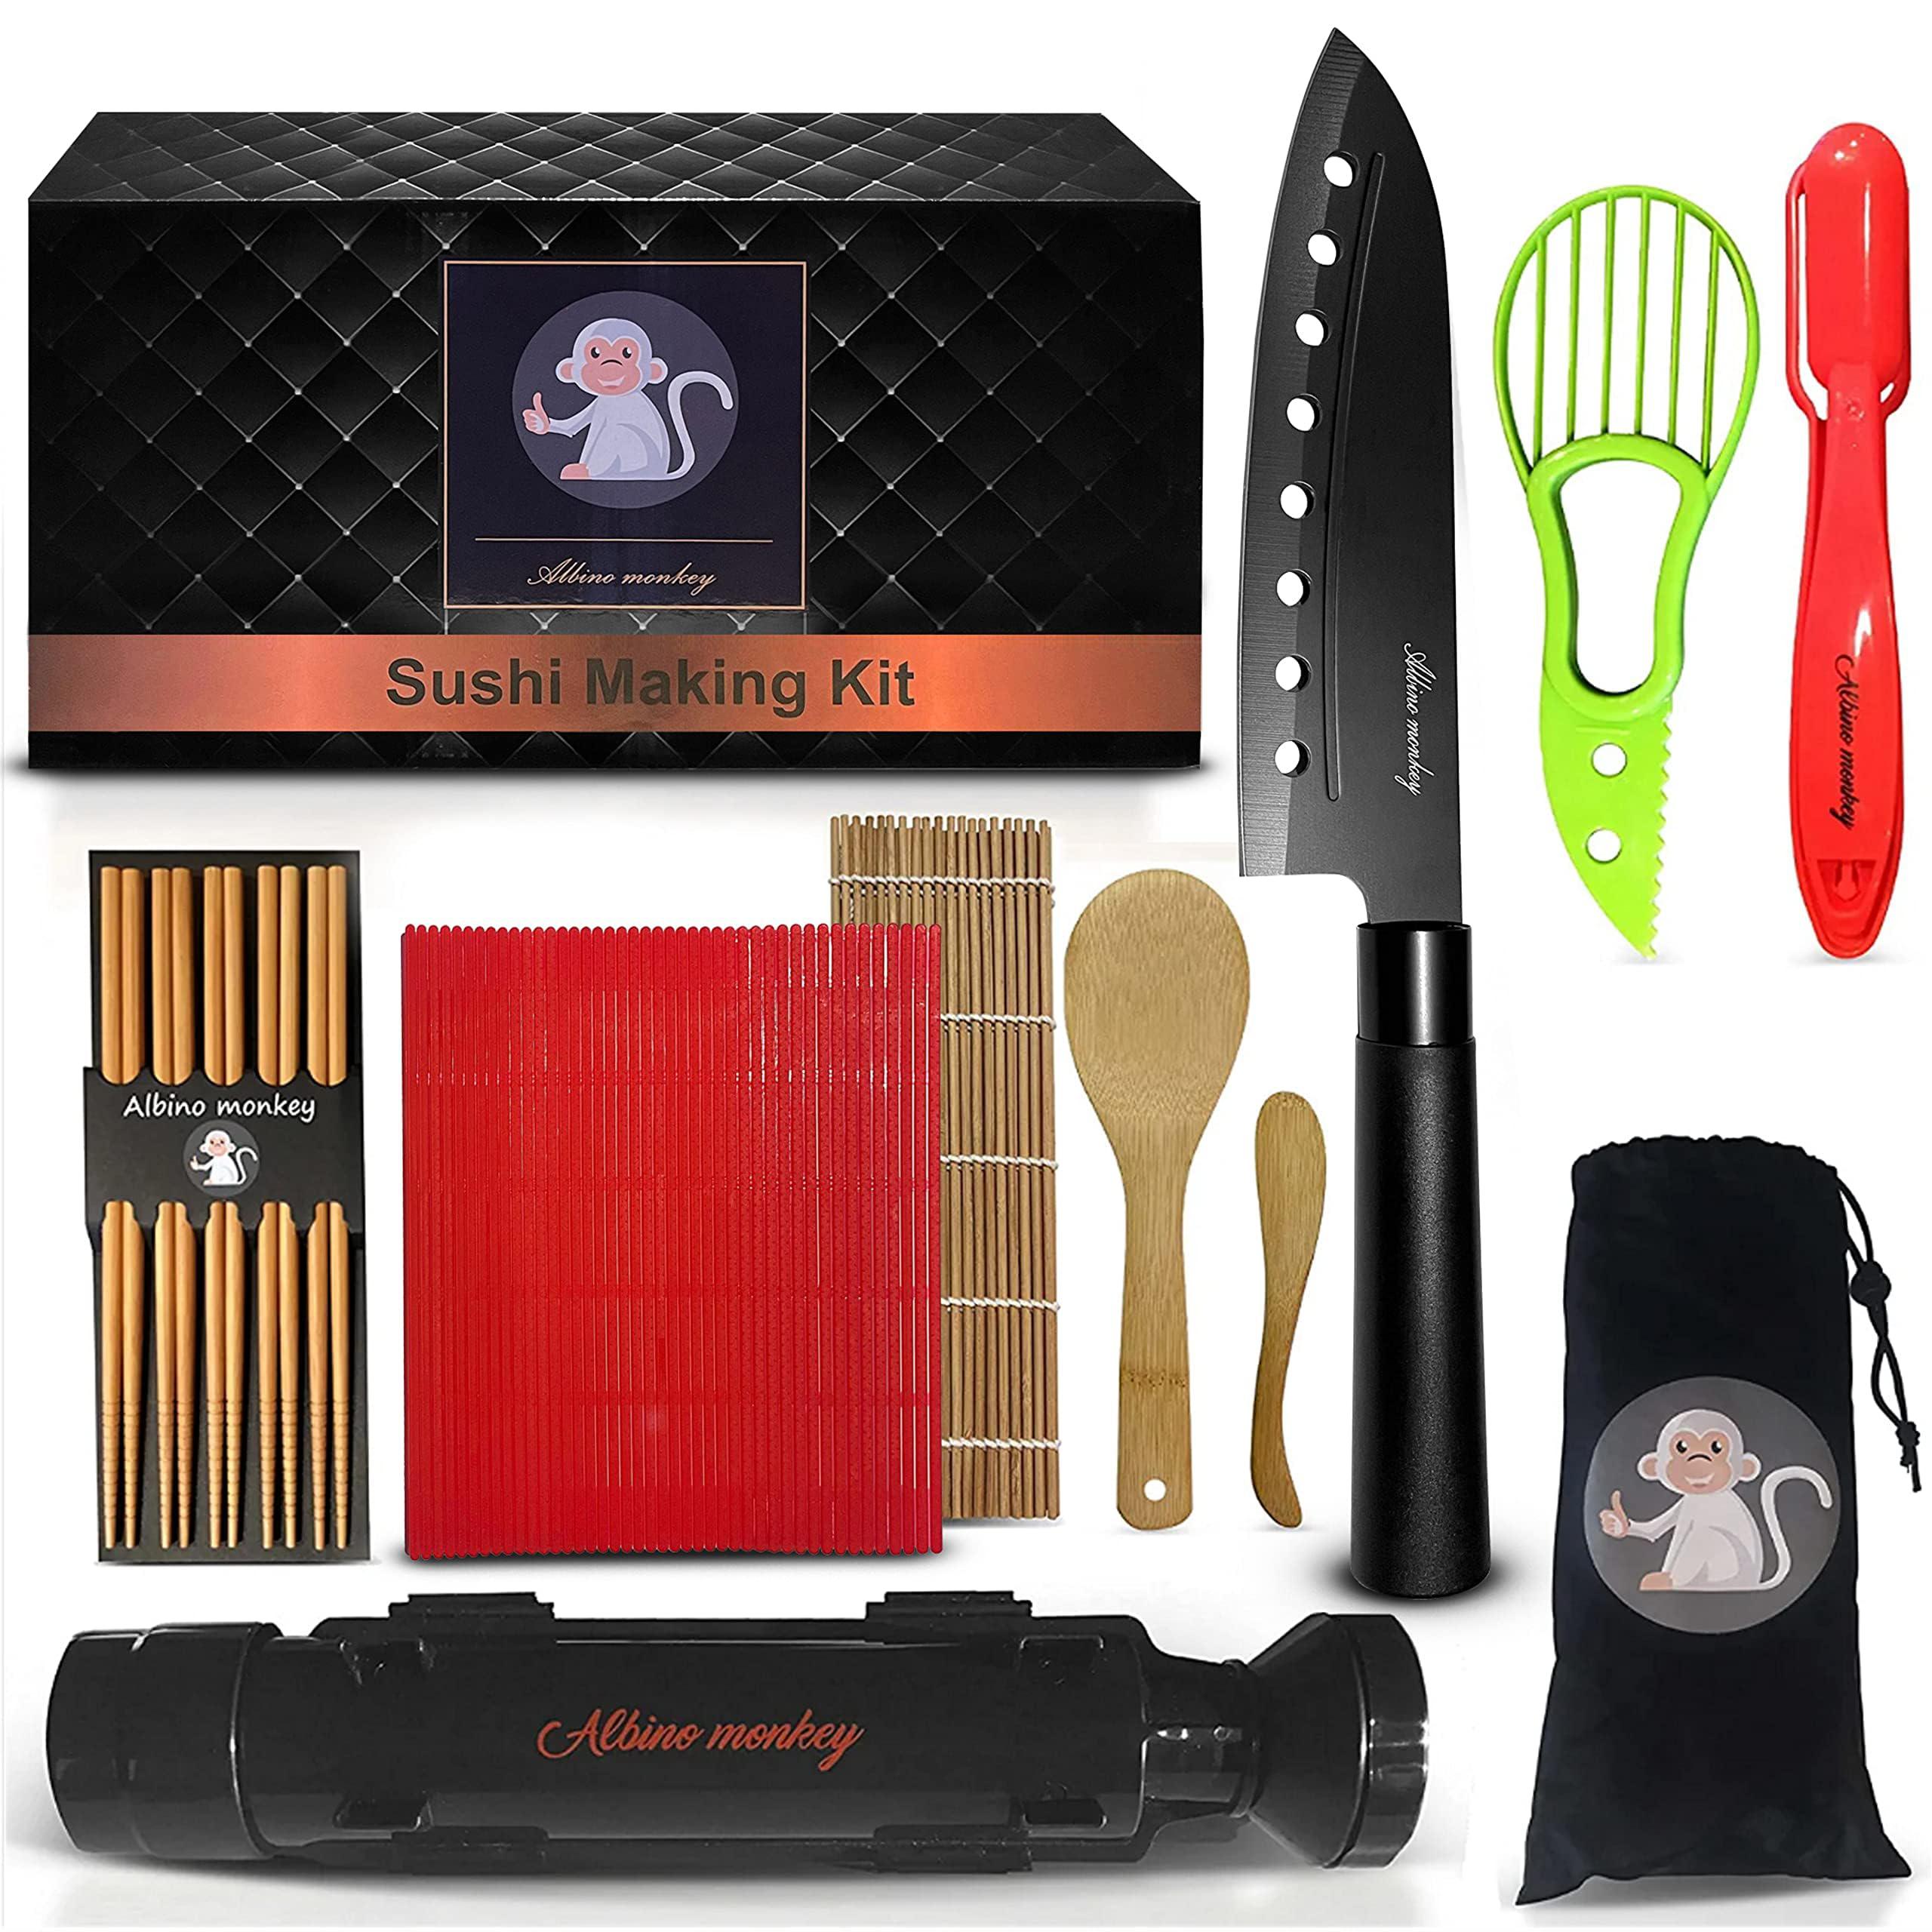 Albino Monkey albino monkey sushi making kit - become an expert in minutes  - easy-to-use sushi maker for beginners with new upgraded sashim